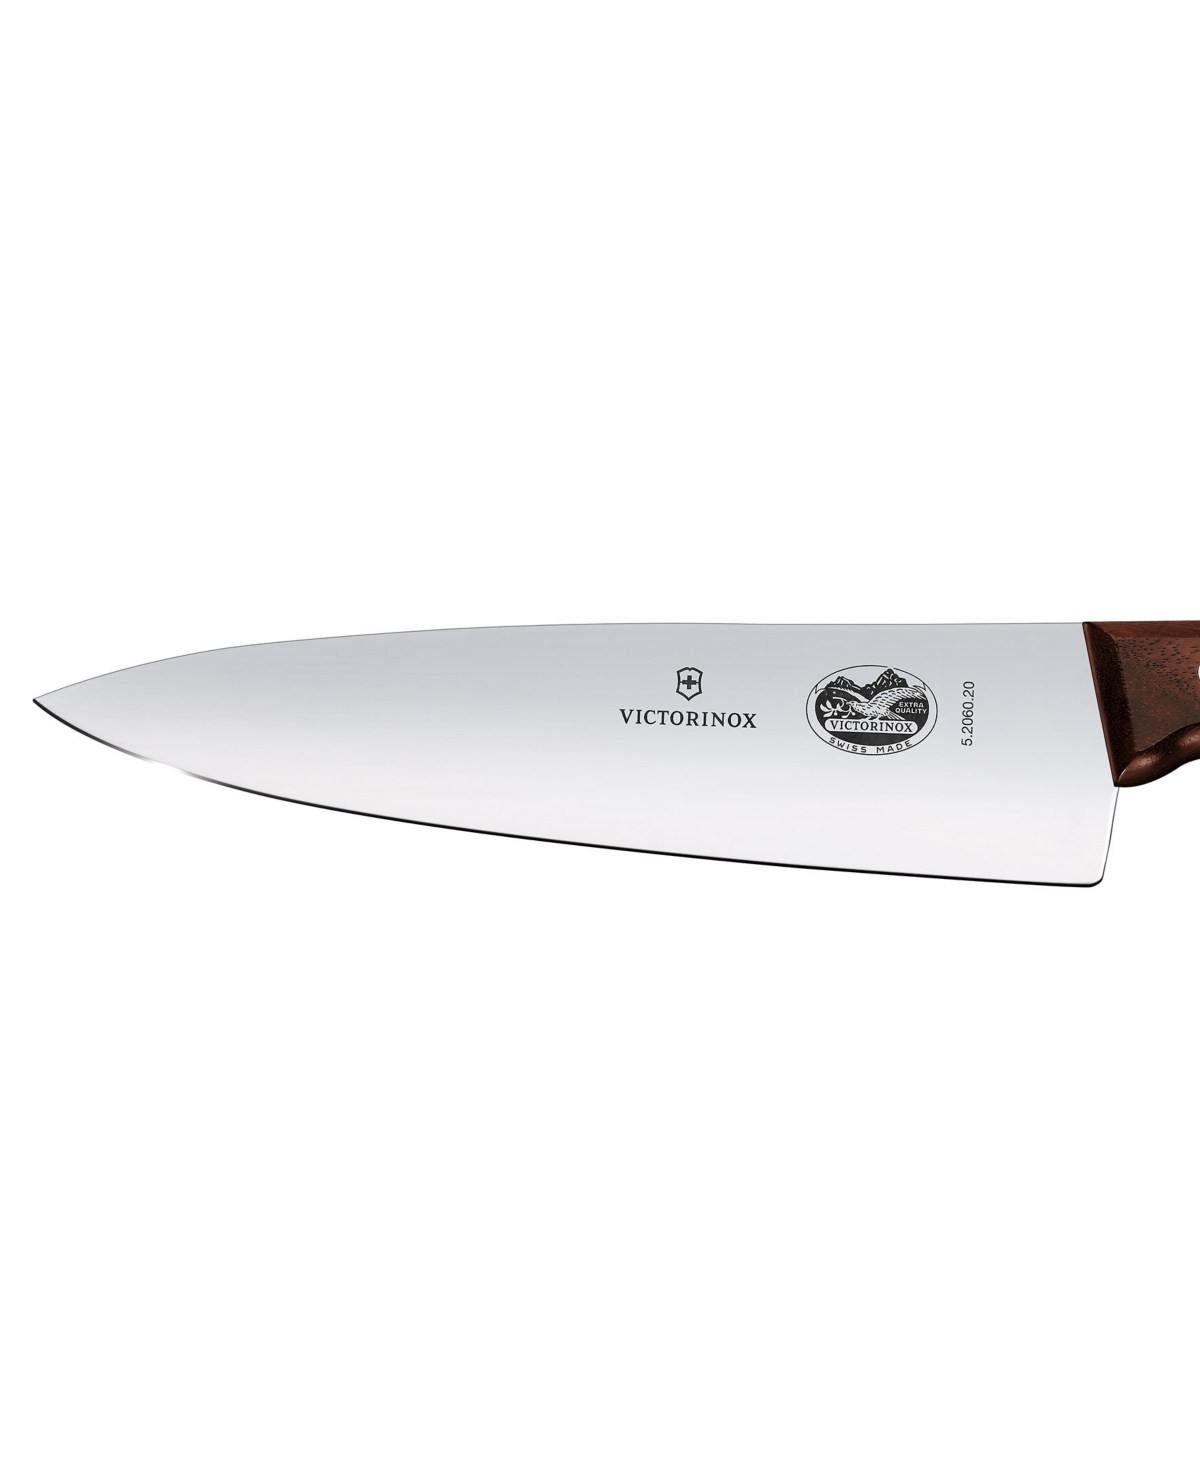 Shop Victorinox Stainless Steel 7.9" Carving Knife With Wood Handle